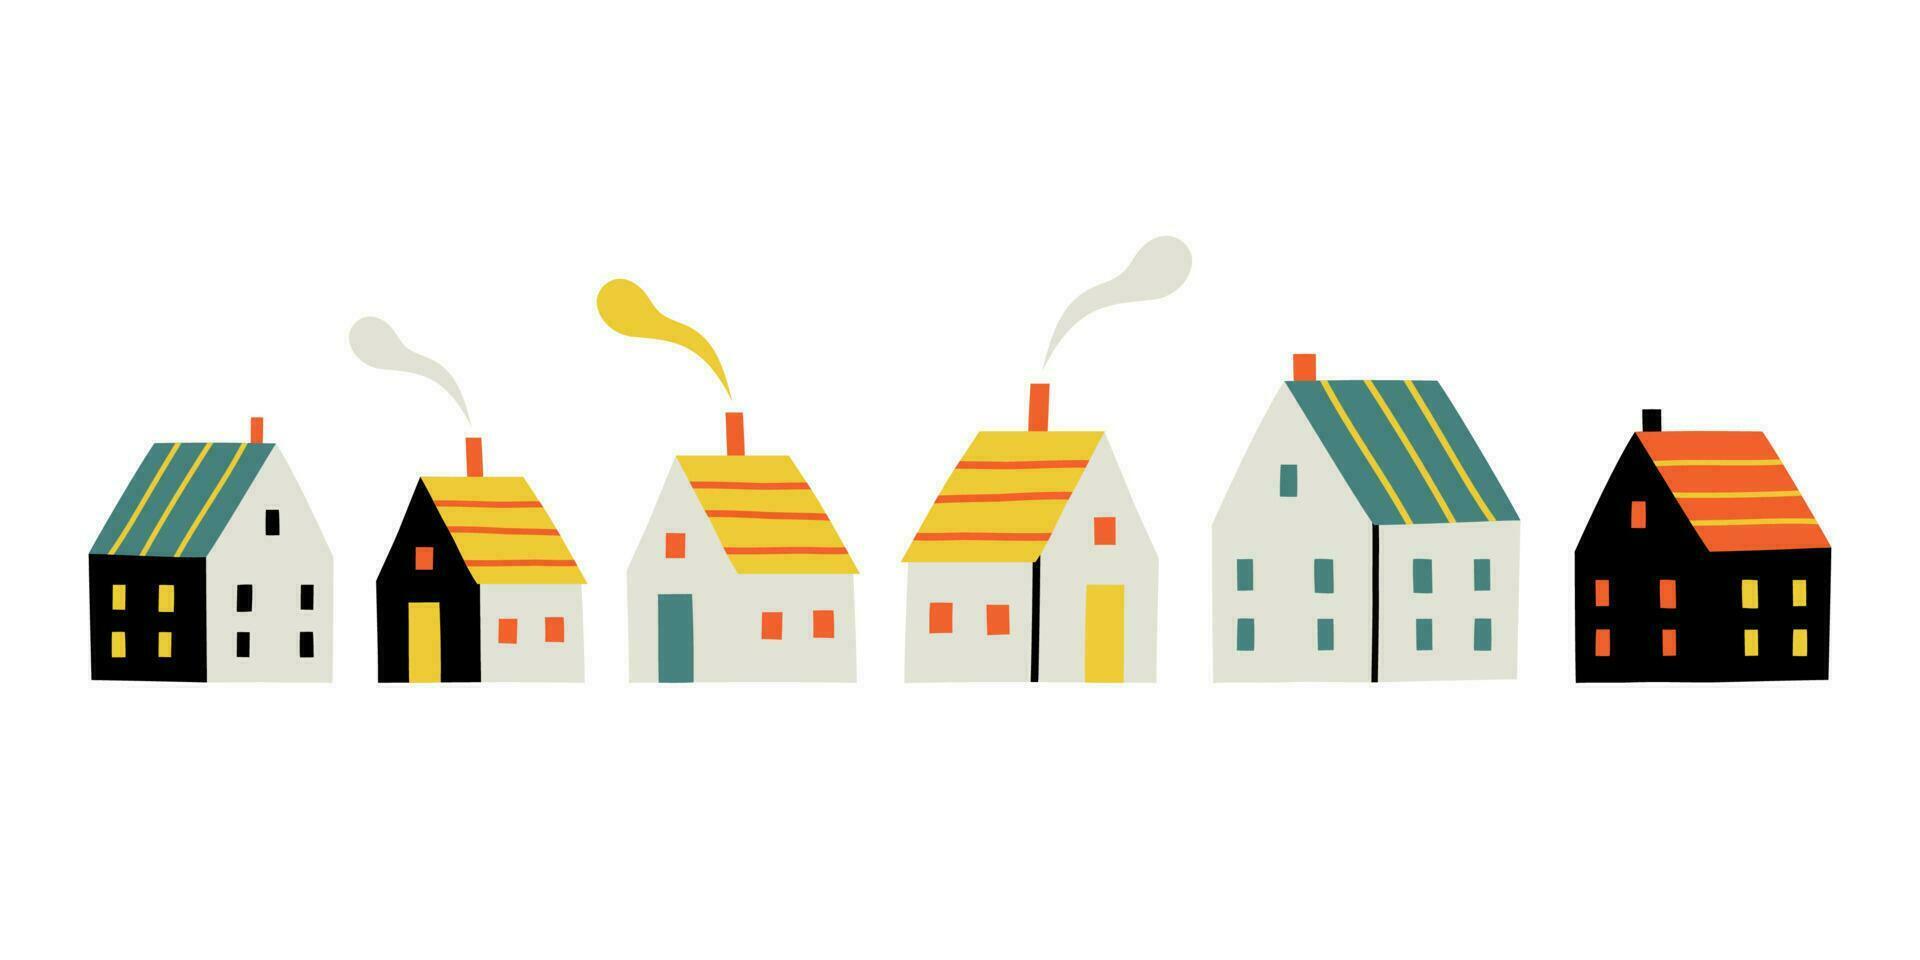 cute country houses in flat trendy style. vector illustration in scandinavian style.